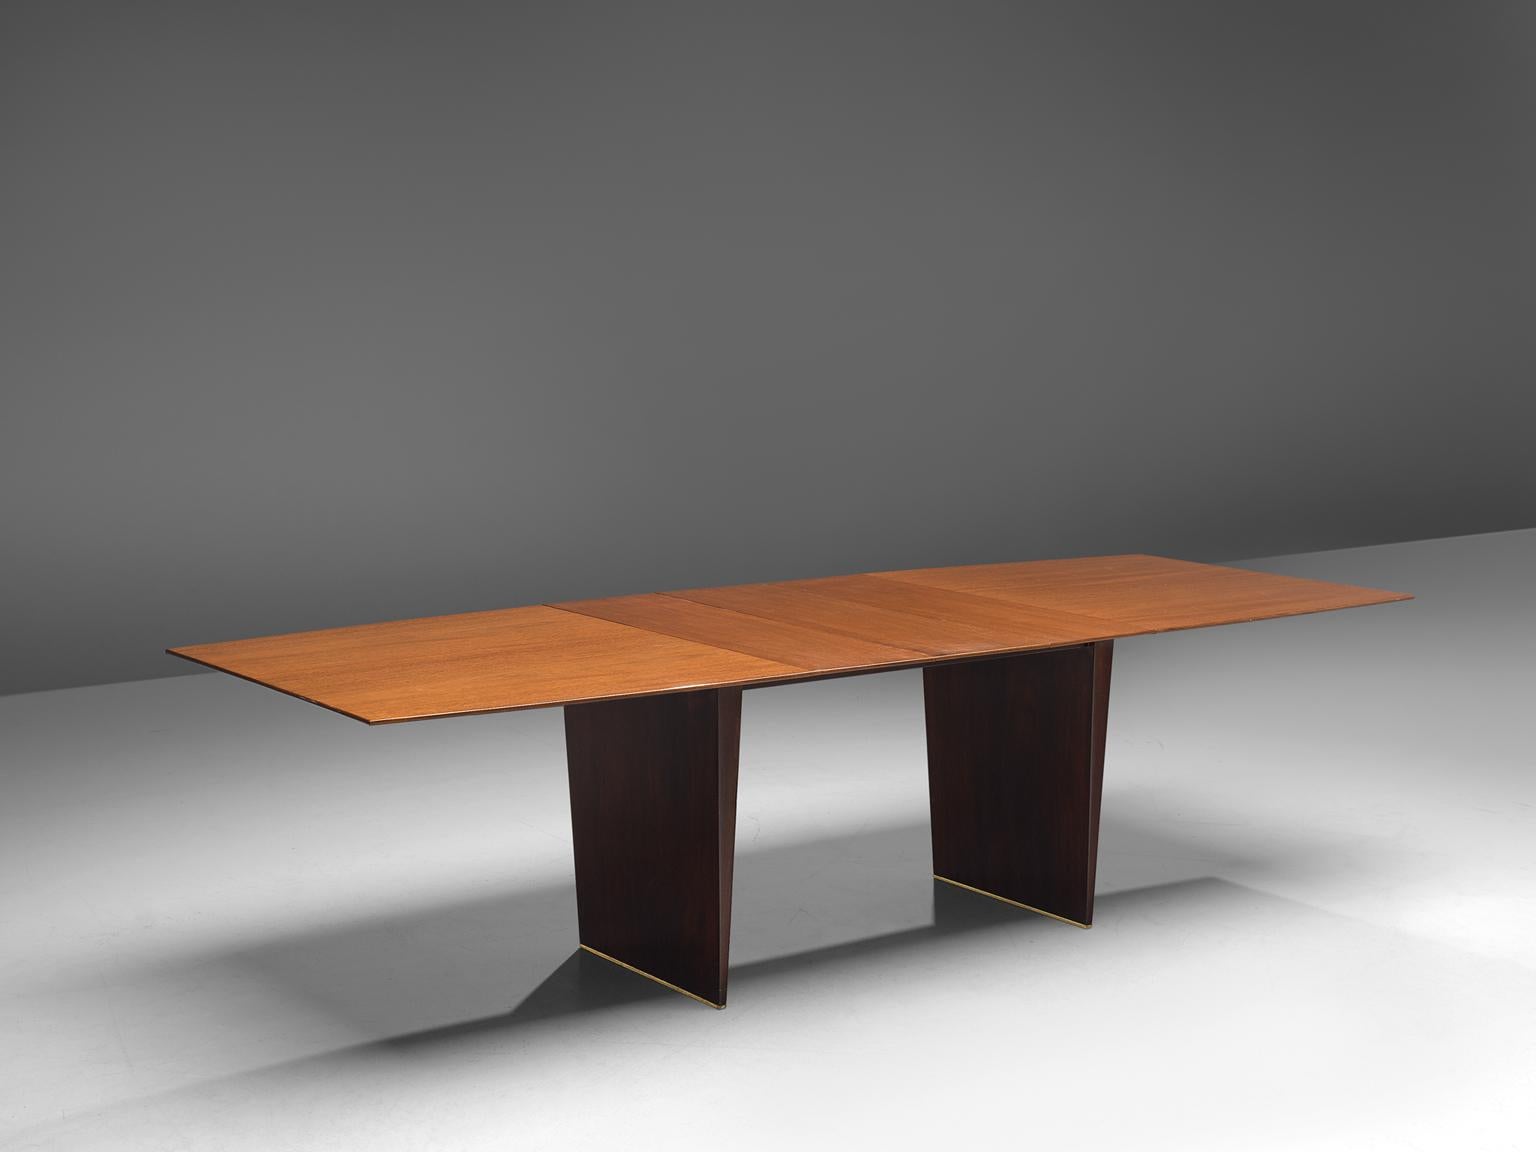 Edward Wormley for Dunbar, dining table, tawi and wood, The United States, 1960s.

Wonderful boat shaped dining table, designed by Edward Wormley in the 1960s. The lacquered table top is made of tawi wood, which has a beautiful warm, honey color